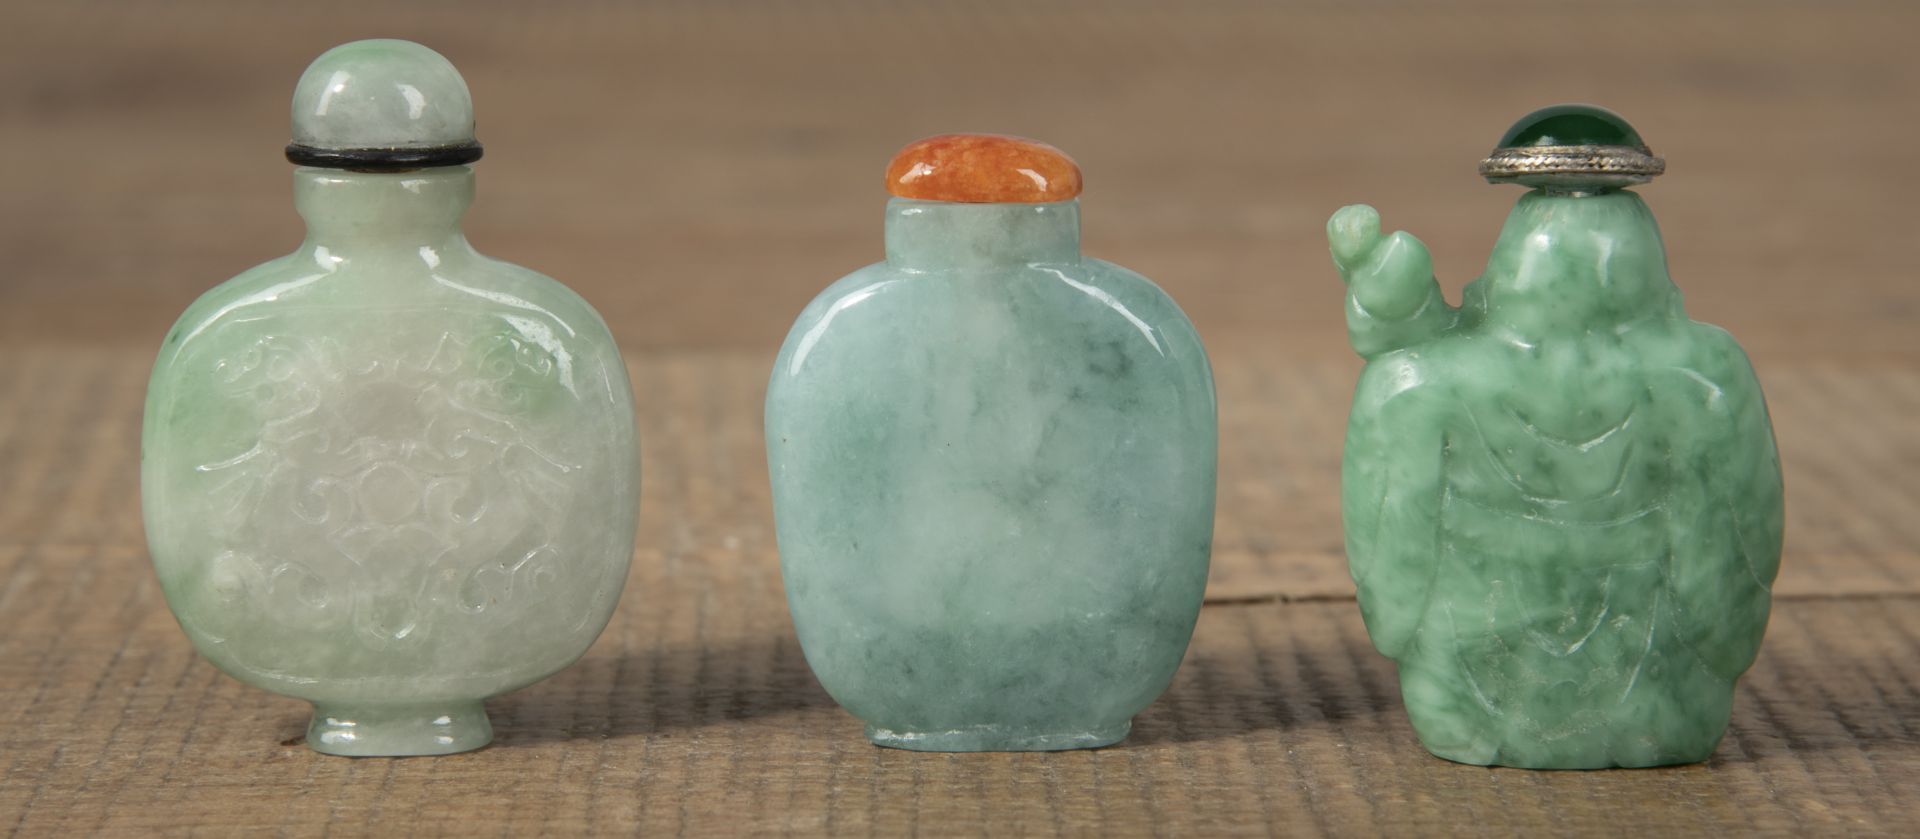 TWO JADE SNUFF BOTTLES, PARTLY CARVED WITH DRAGONS, AND ANOTHER SNUFF BOTTLE IN THE SHAPE OF THE SH - Image 2 of 4